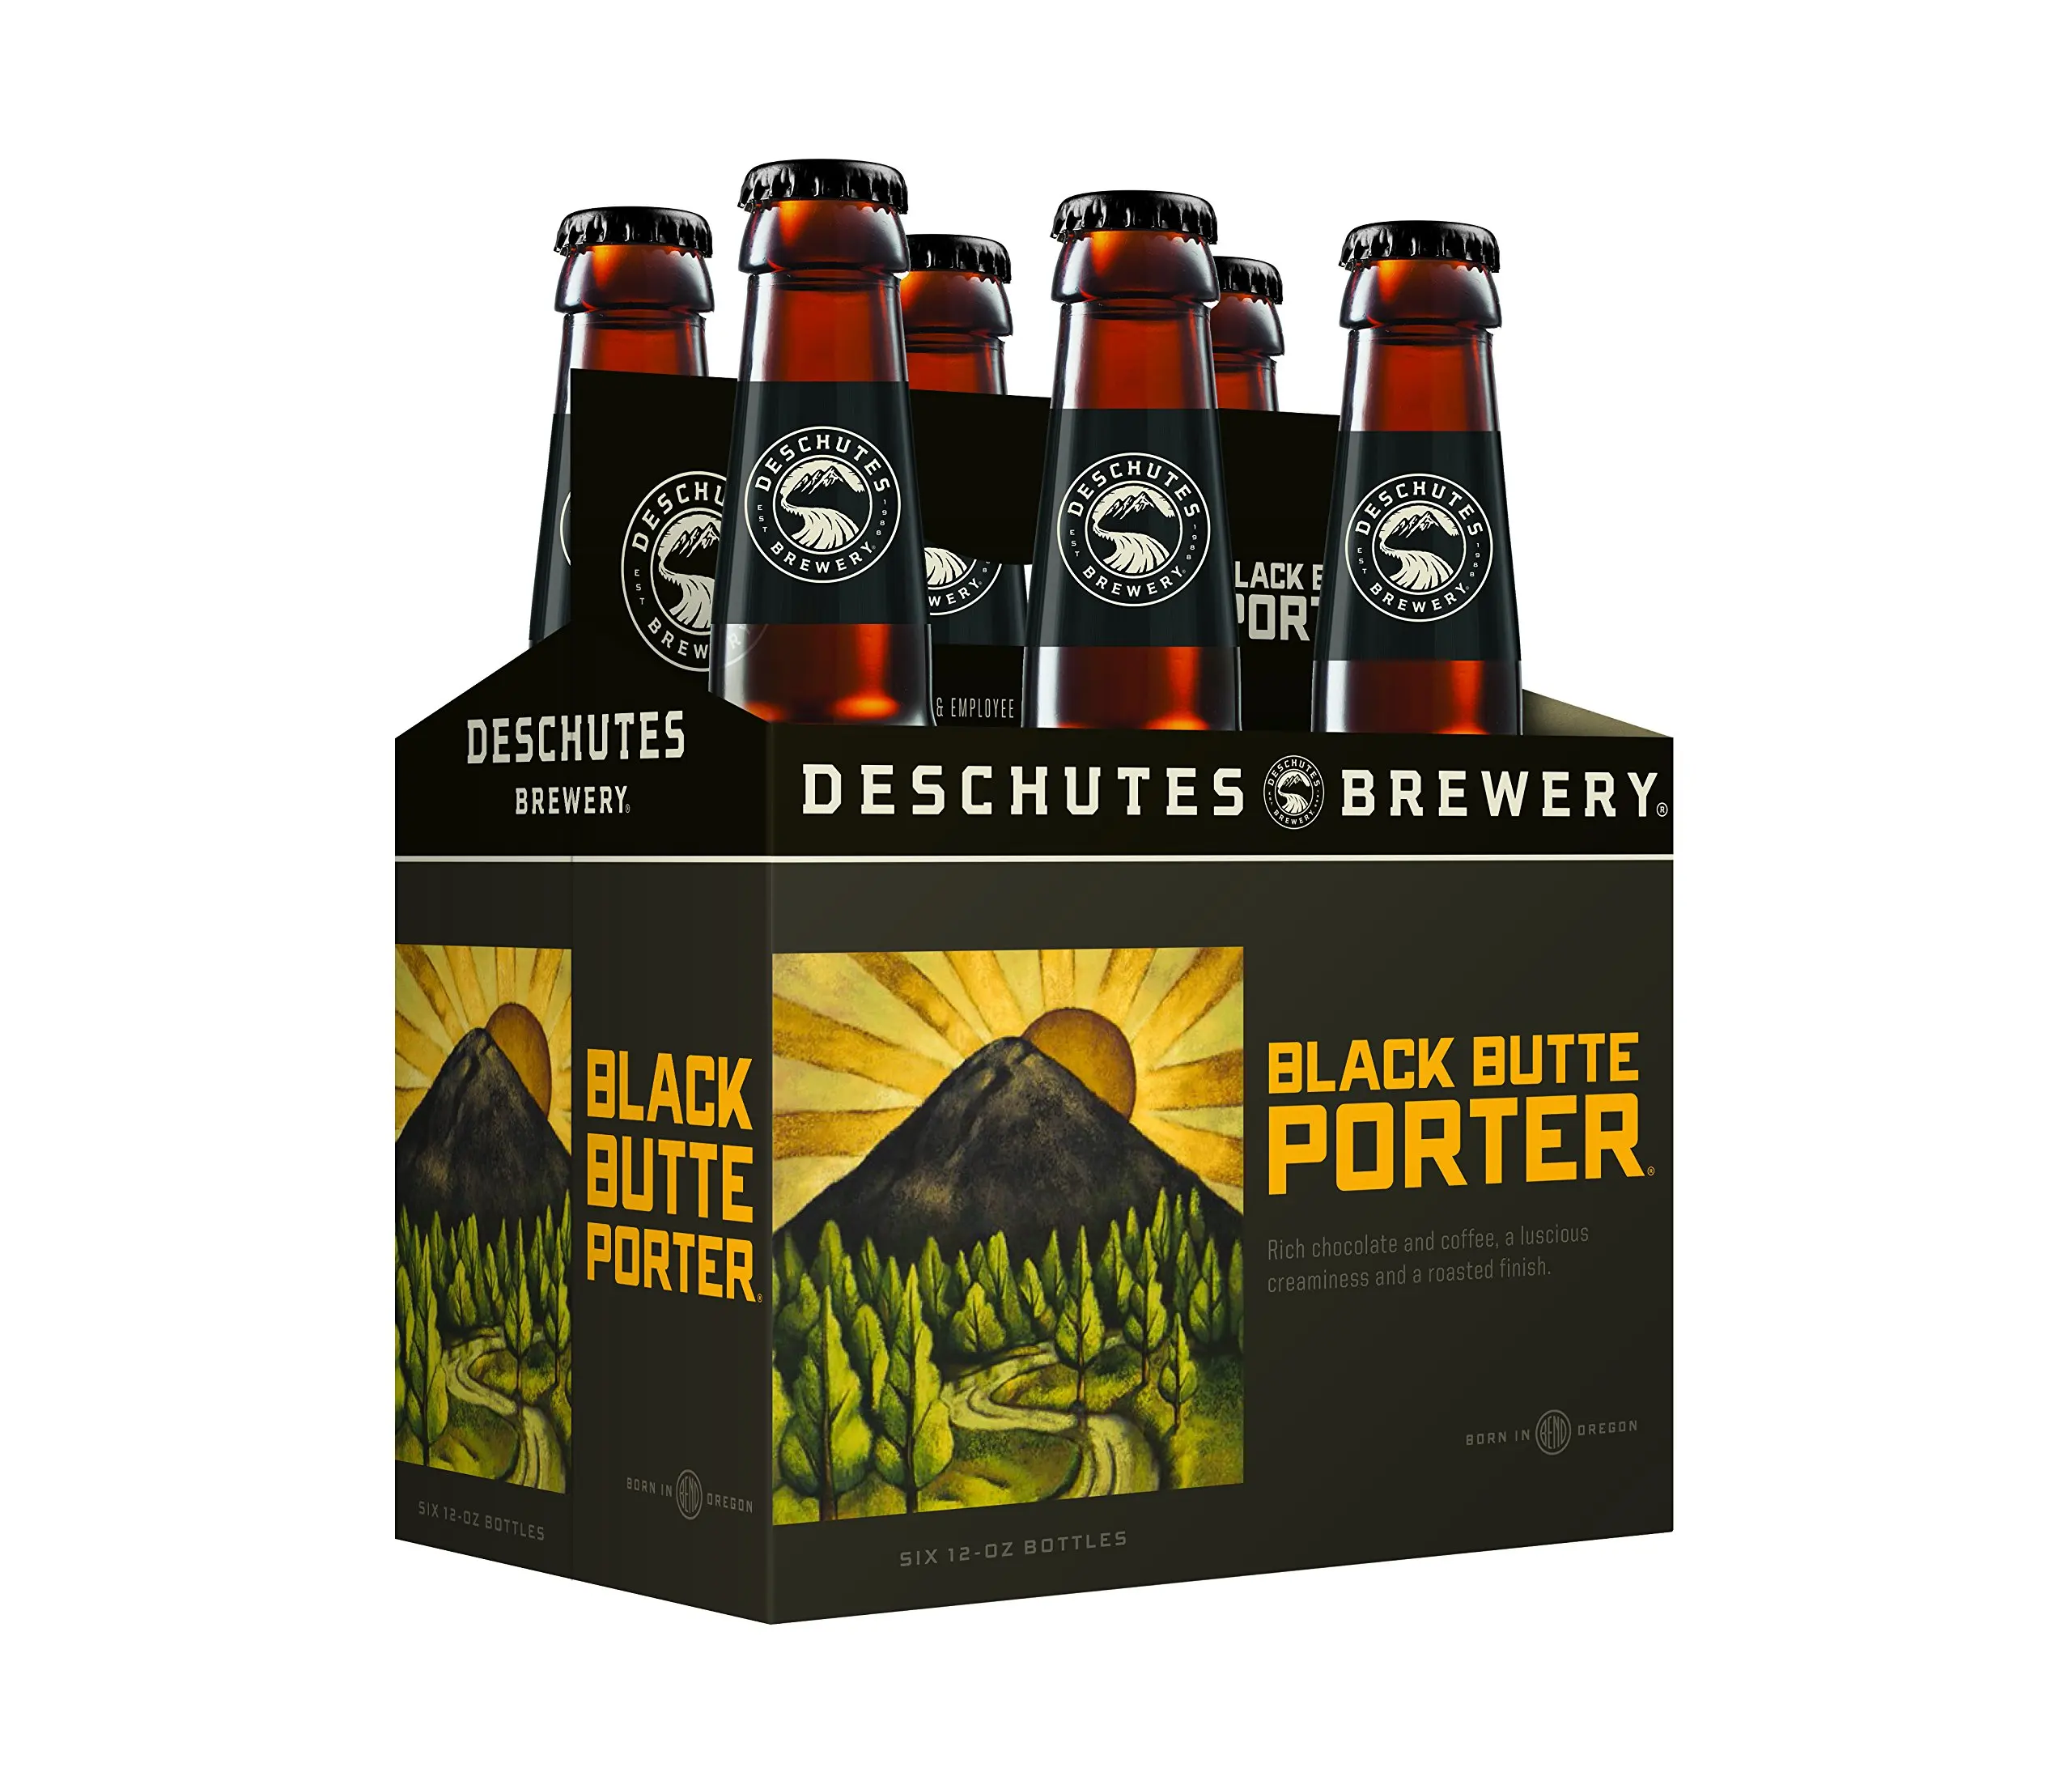 1.0. Black Butte Porter, crafted from chocolate and crystal malts, is Desch...